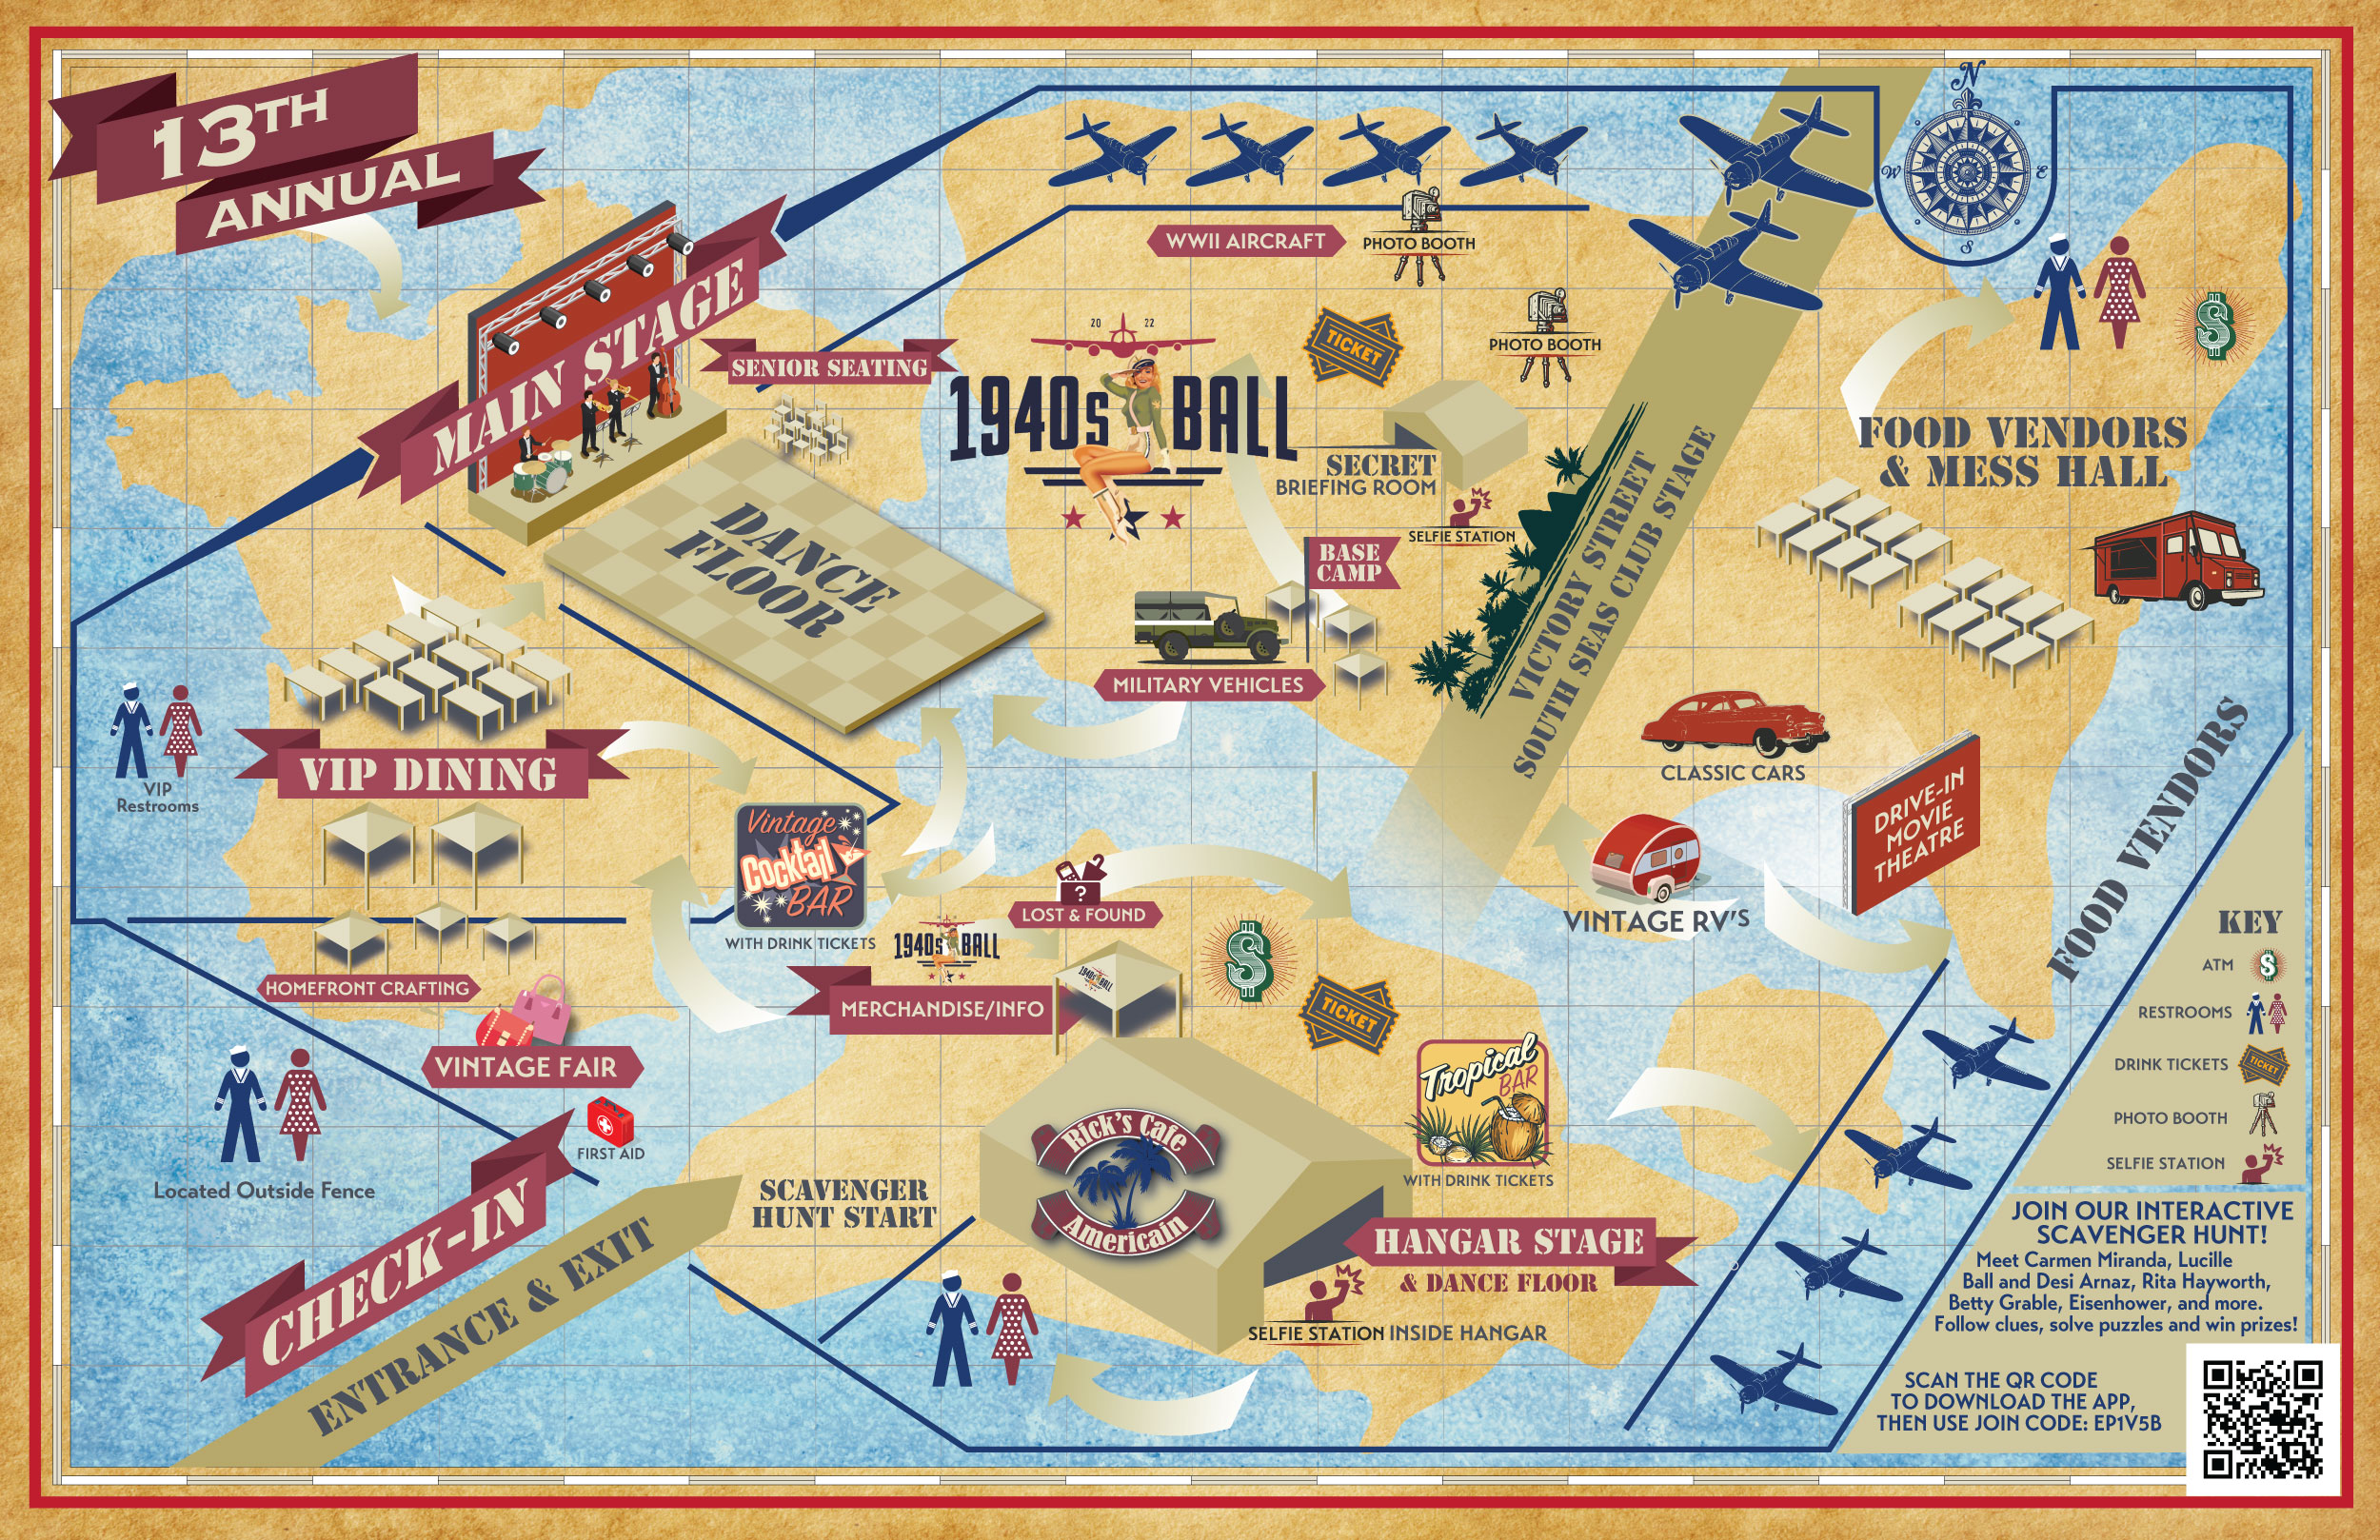 1940s-Ball-2023-Event-Map-(13th-Annual)